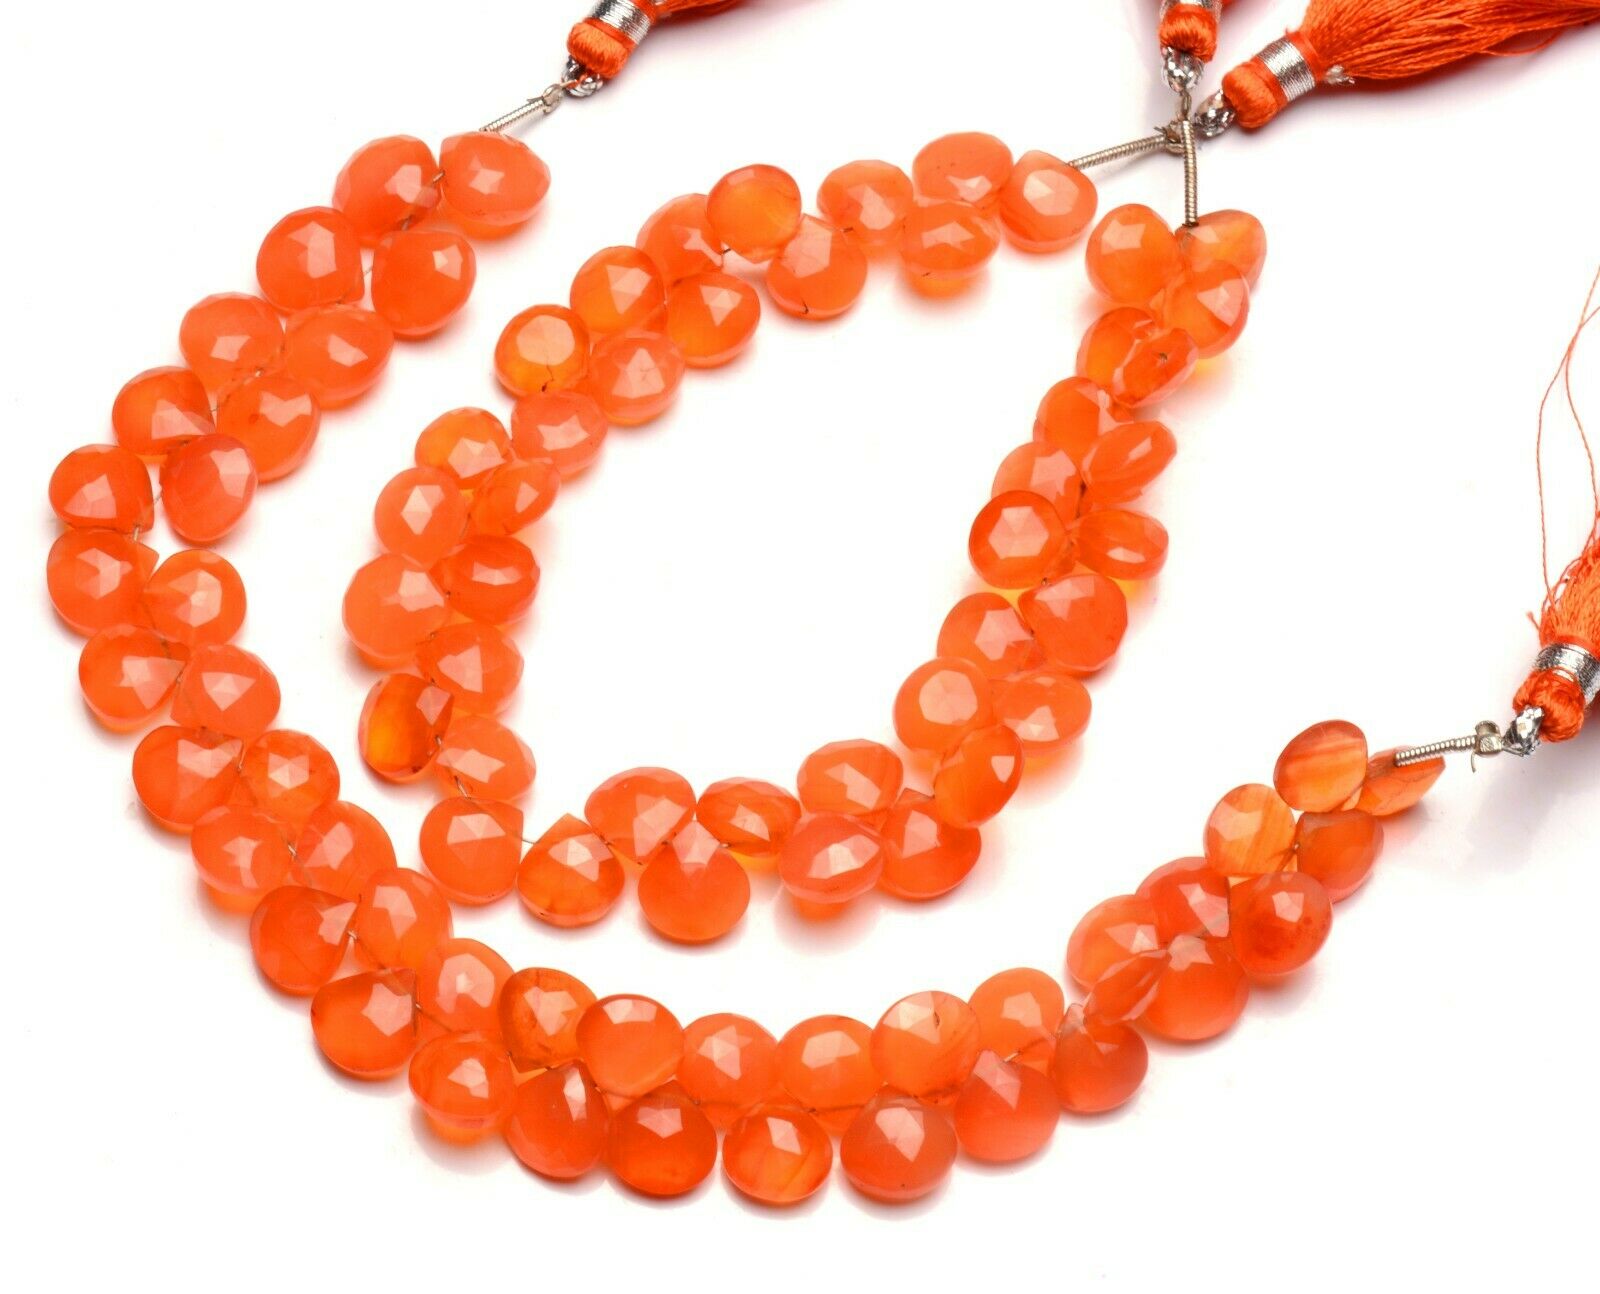 Natural Gem Carnelian 9mm Faceted Heart Shape Briolettes 9" Beads For Jewelry